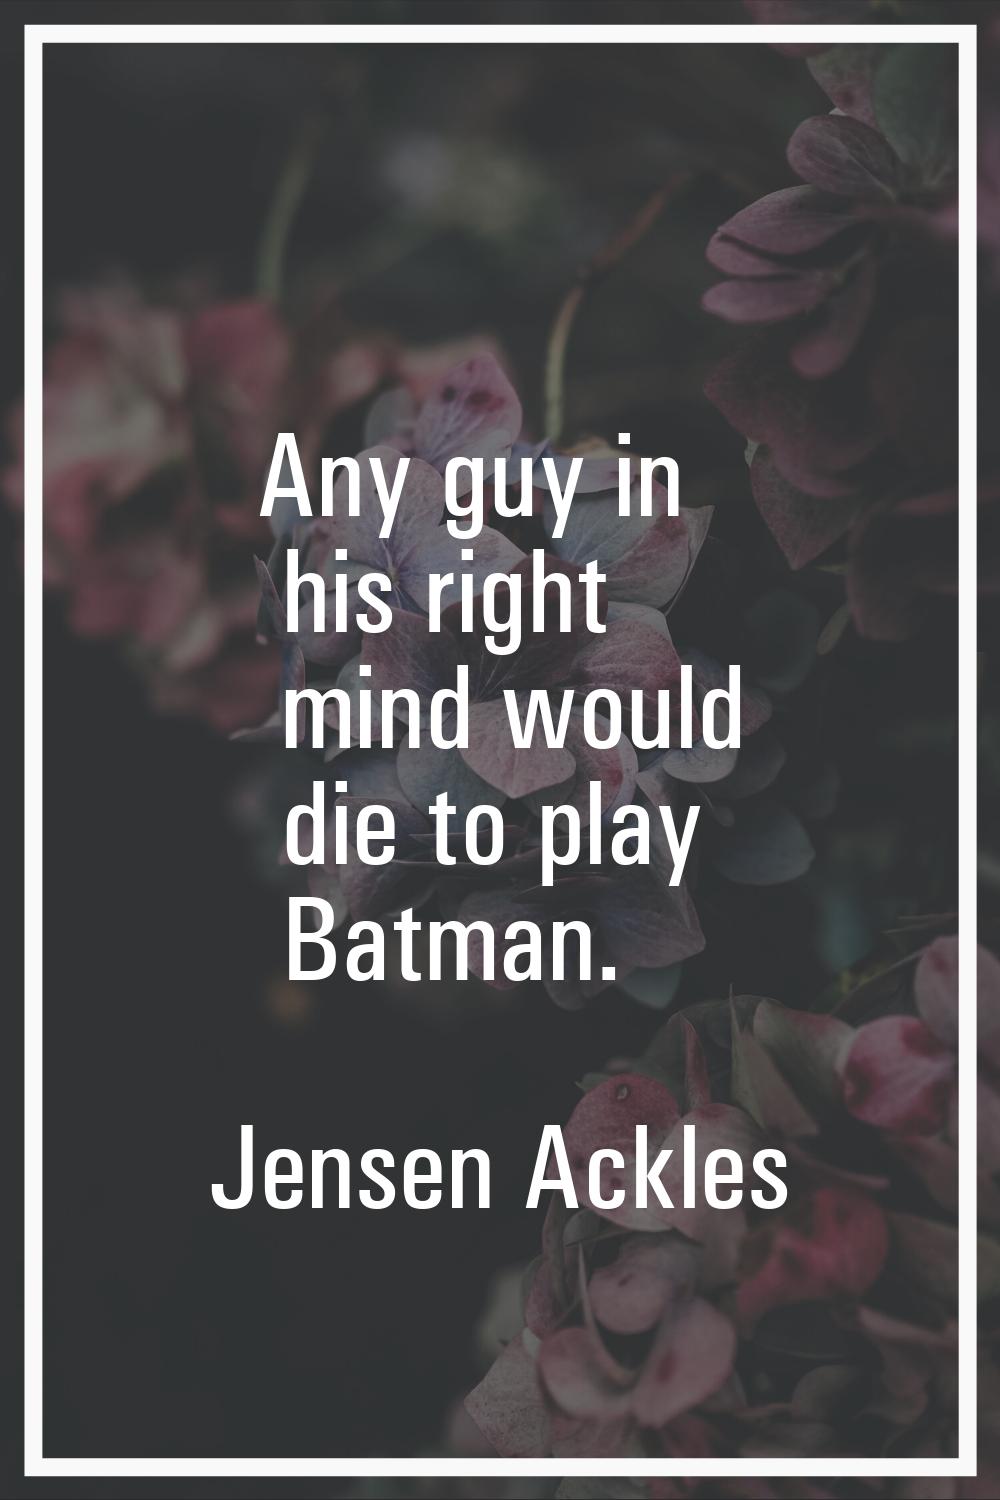 Any guy in his right mind would die to play Batman.